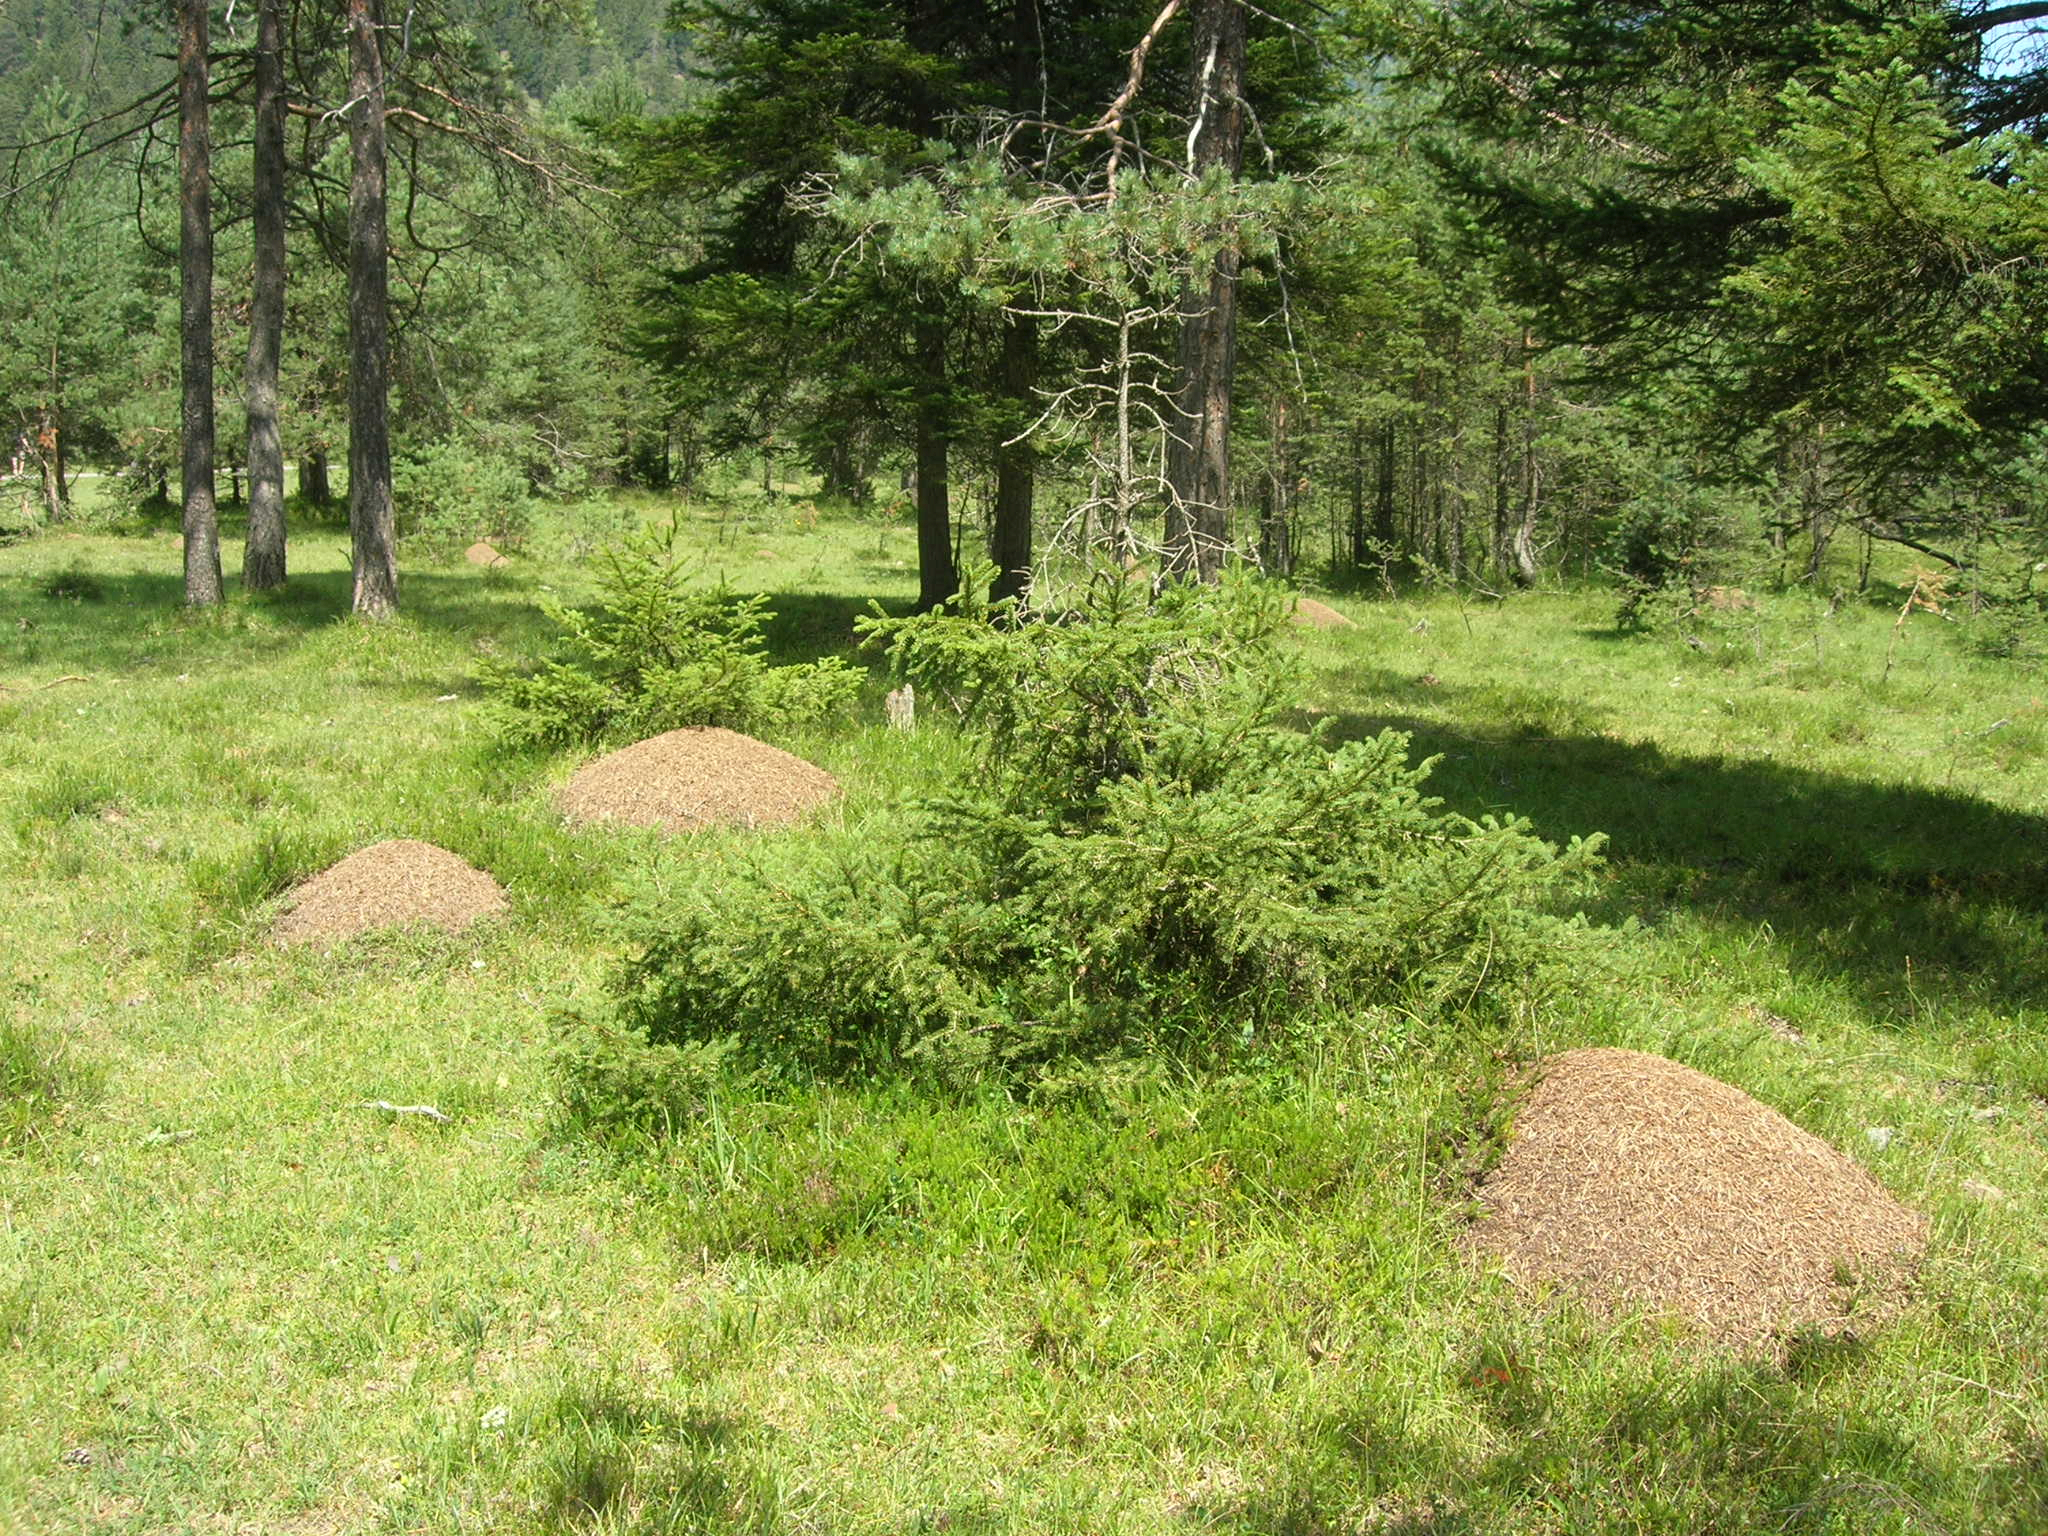 ant hills in open spruce forest